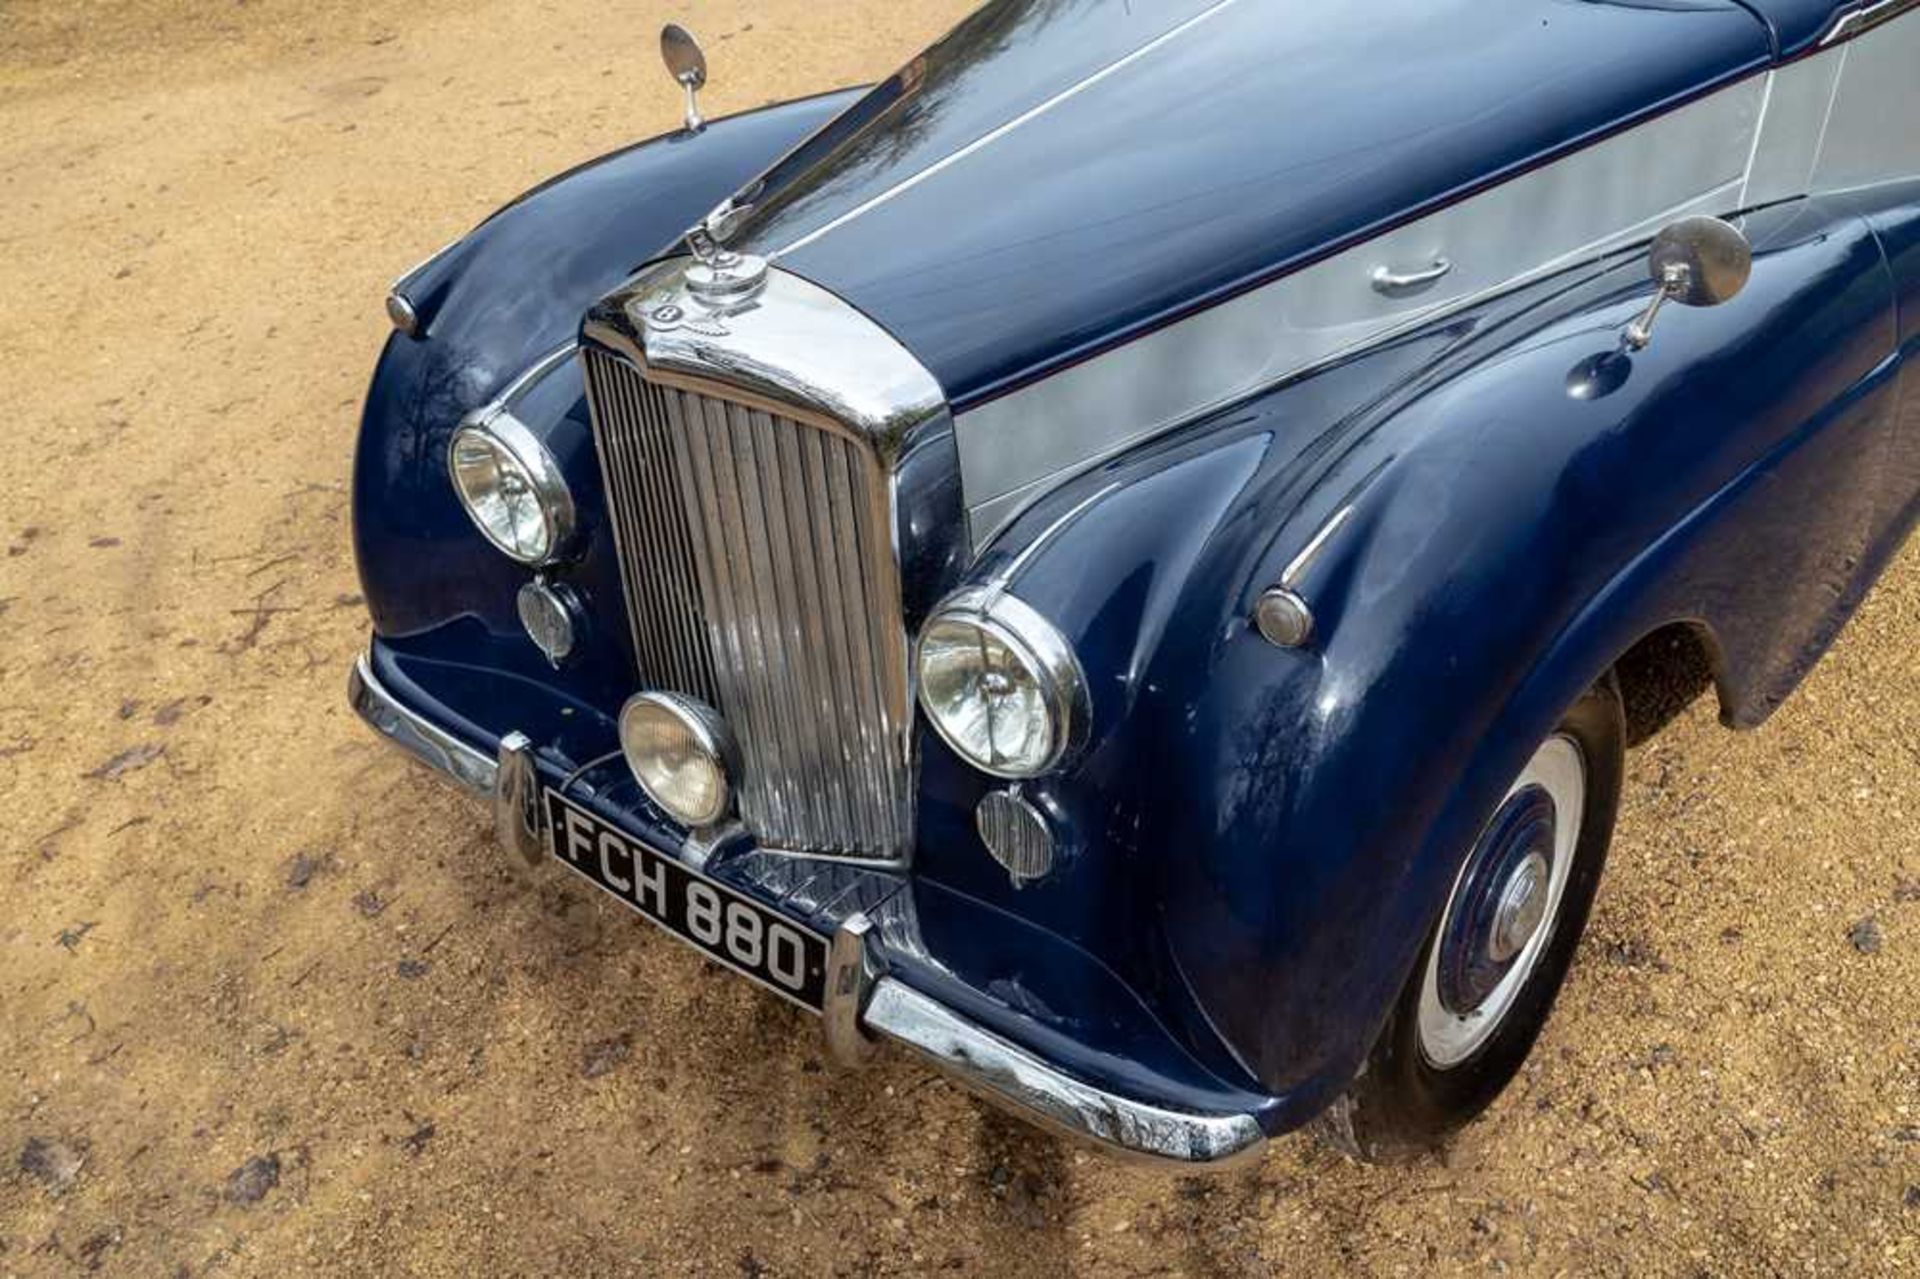 1954 Bentley R-Type Park Ward Drophead Coupe 1 of just 9 R-Type chassis clothed to Design 552 - Image 29 of 86